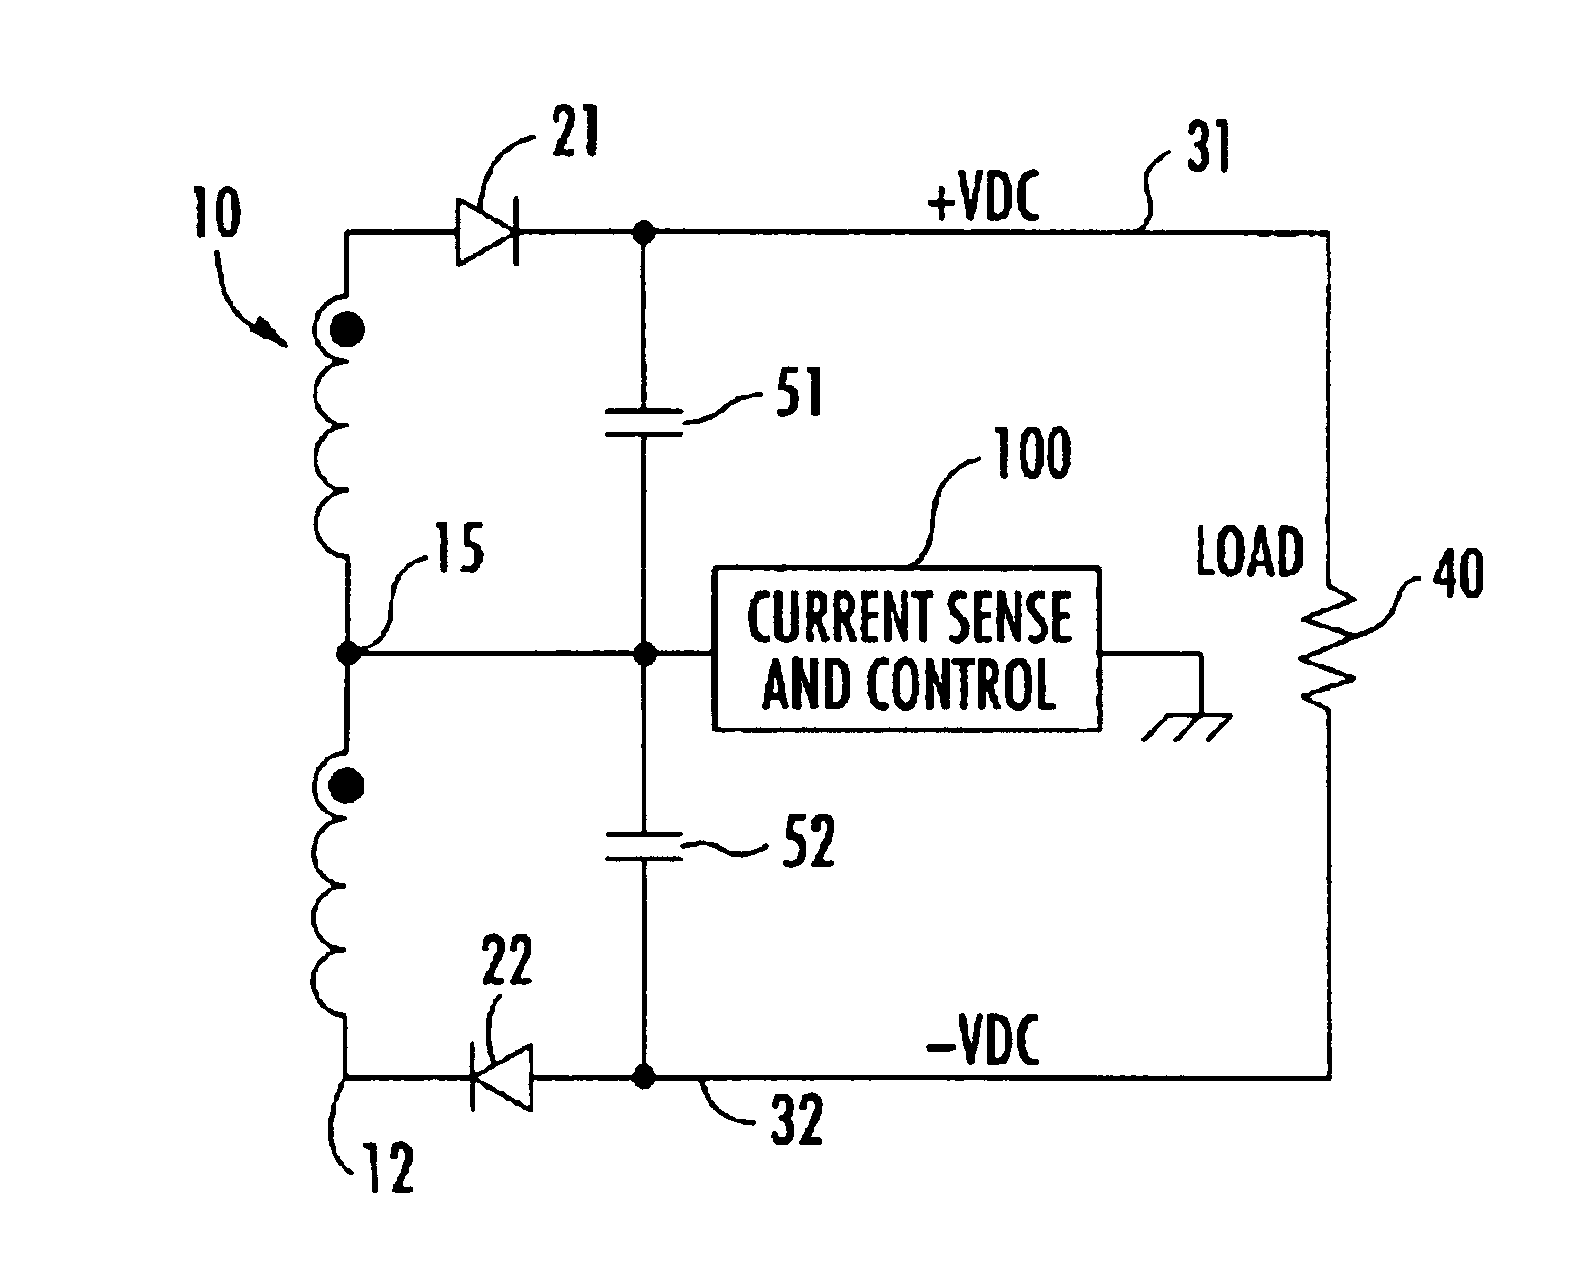 Method and apparatus for limiting ground fault current